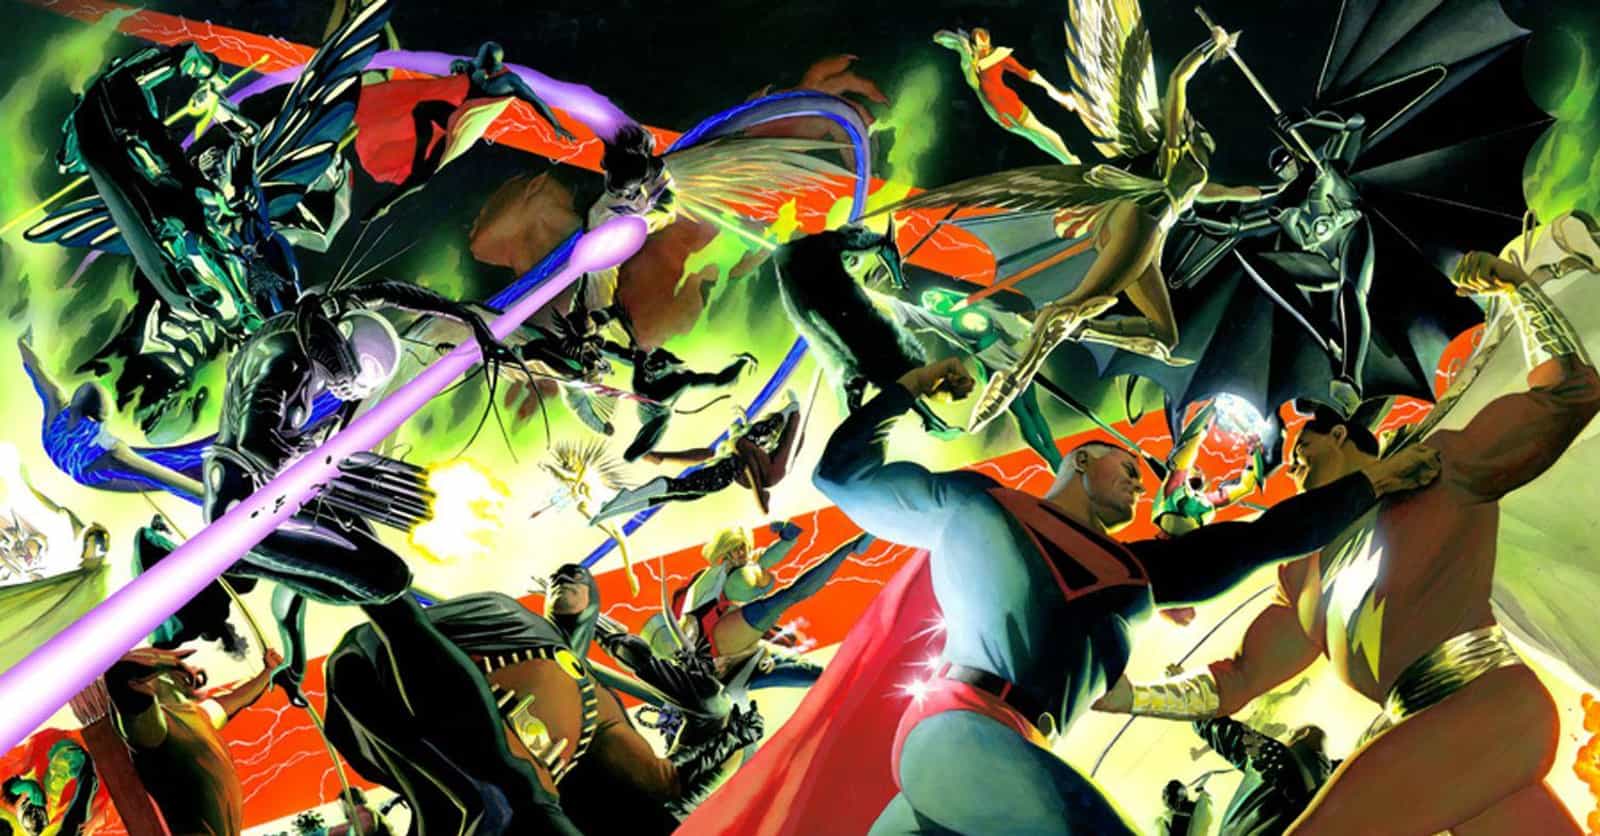 'Kingdom Come' Was One Of DC's Biggest 'Elseworlds' Hits